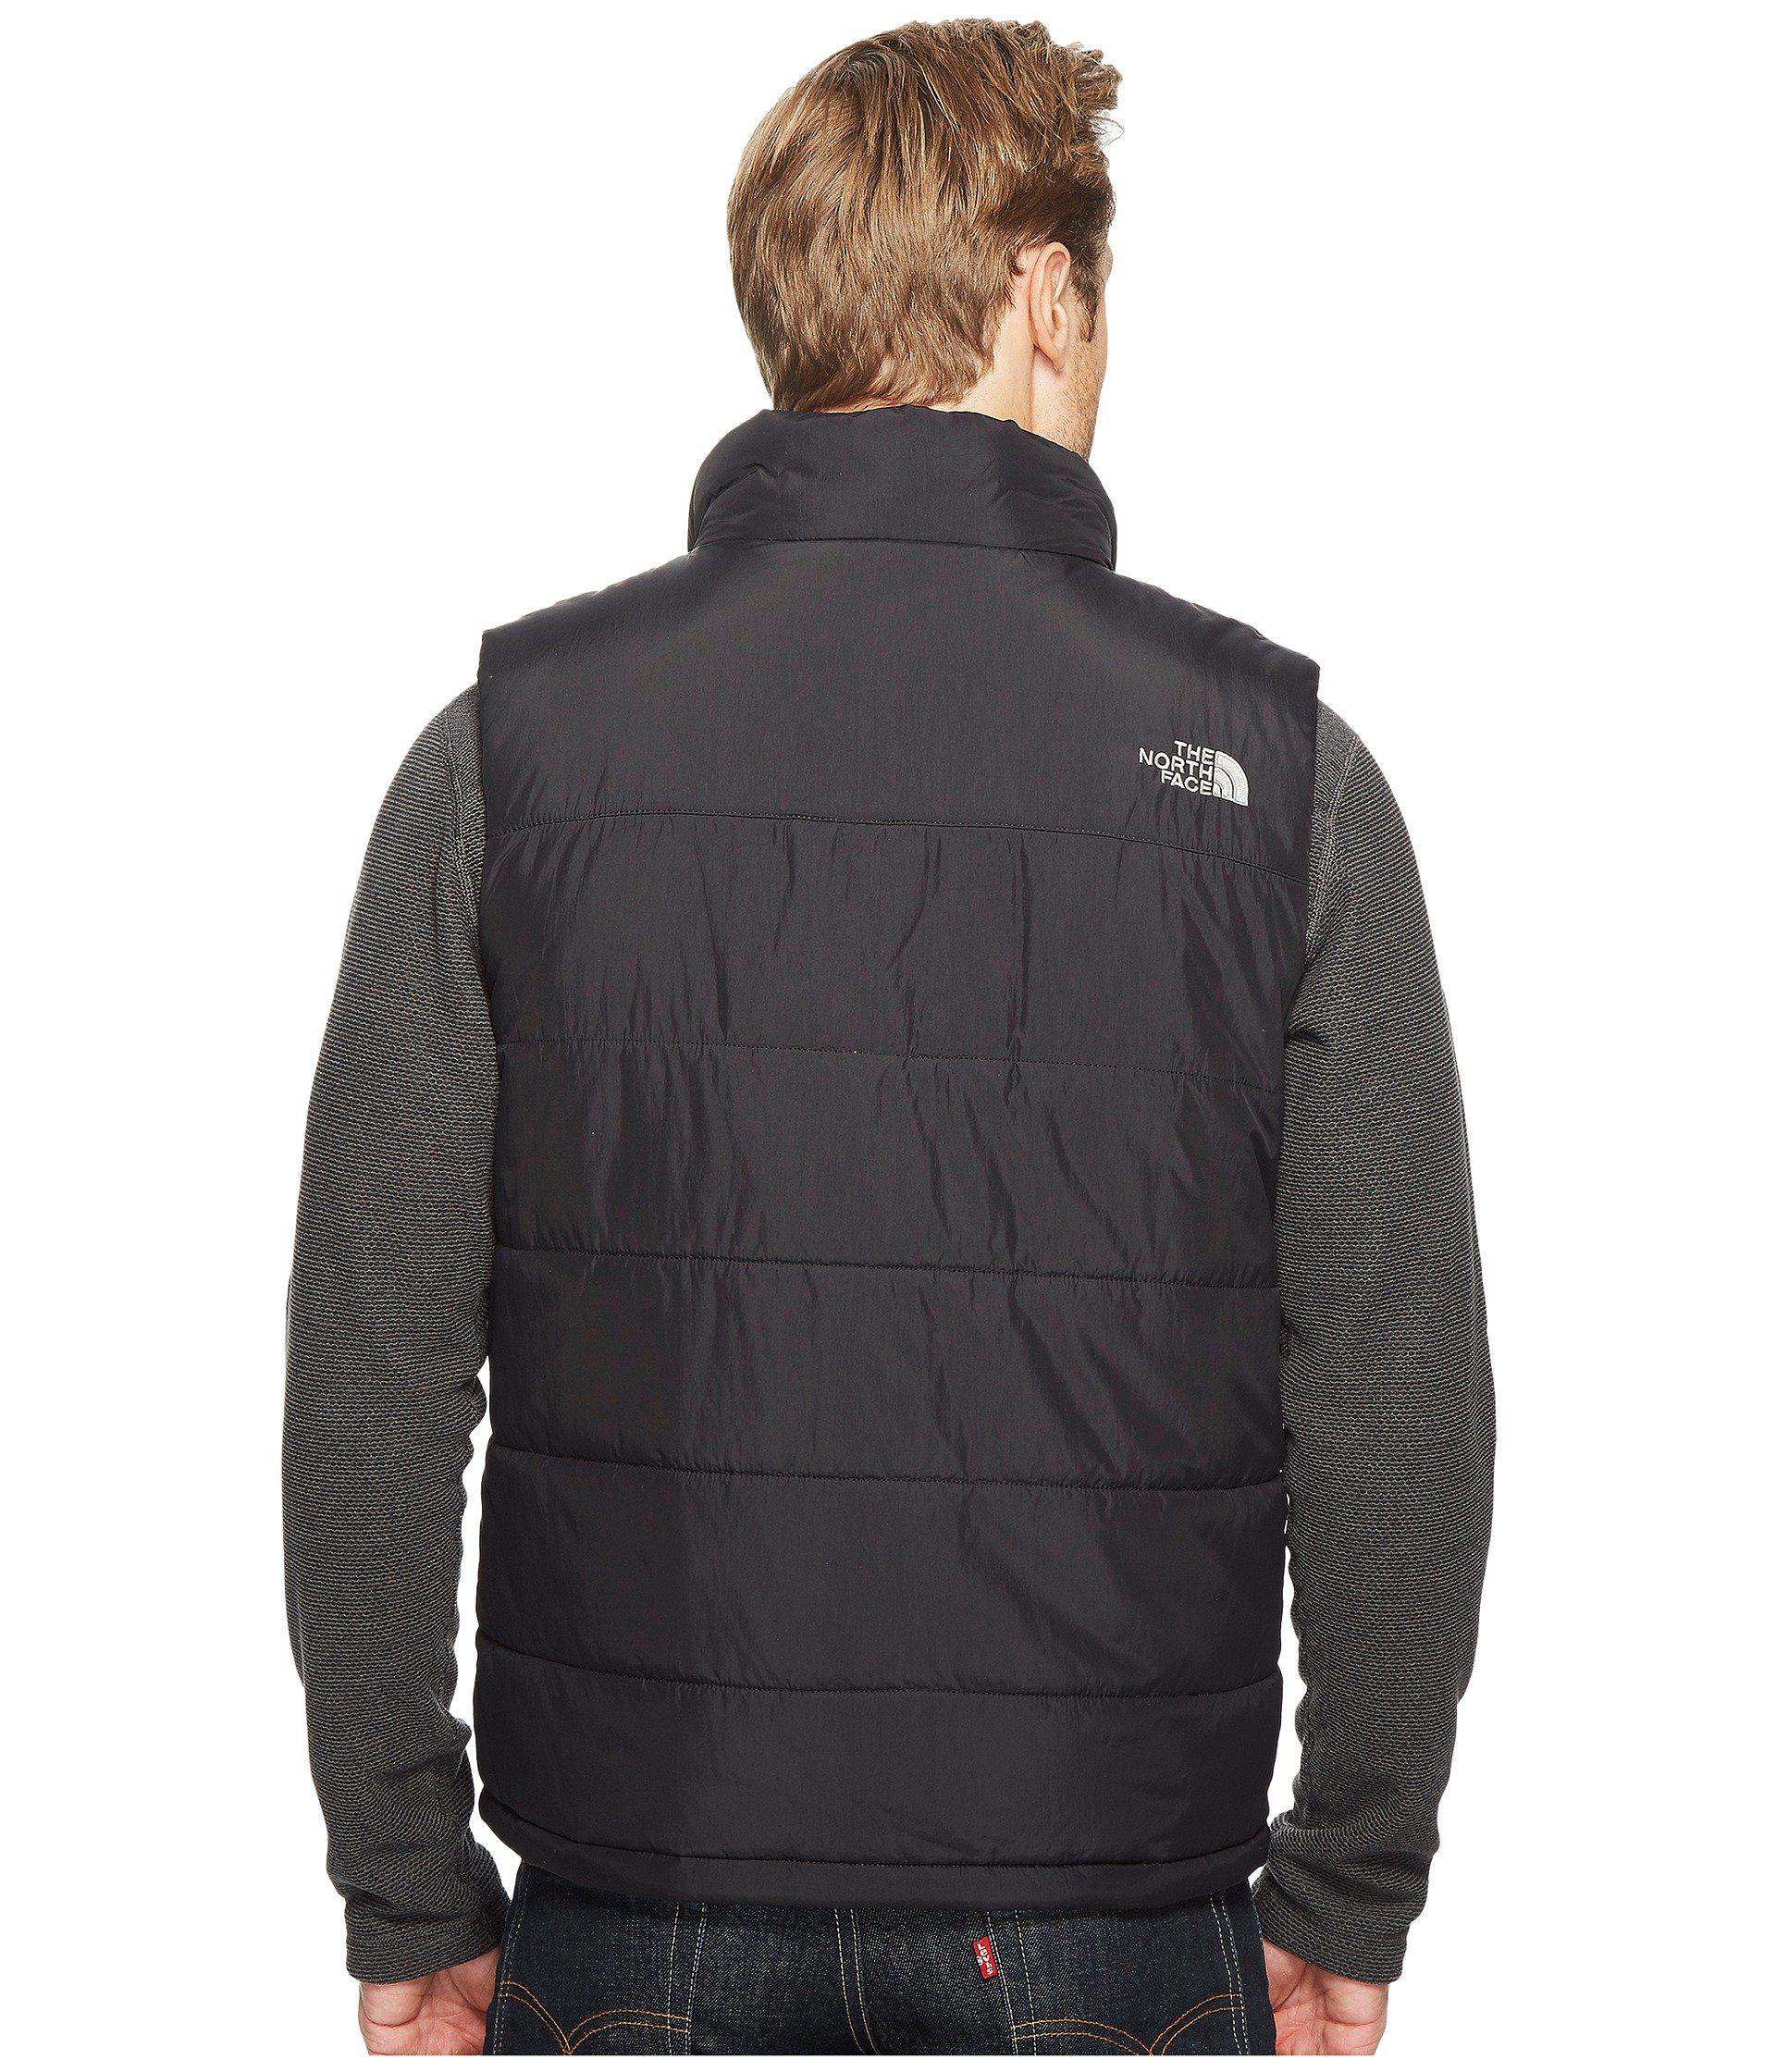 north face harway vest mens